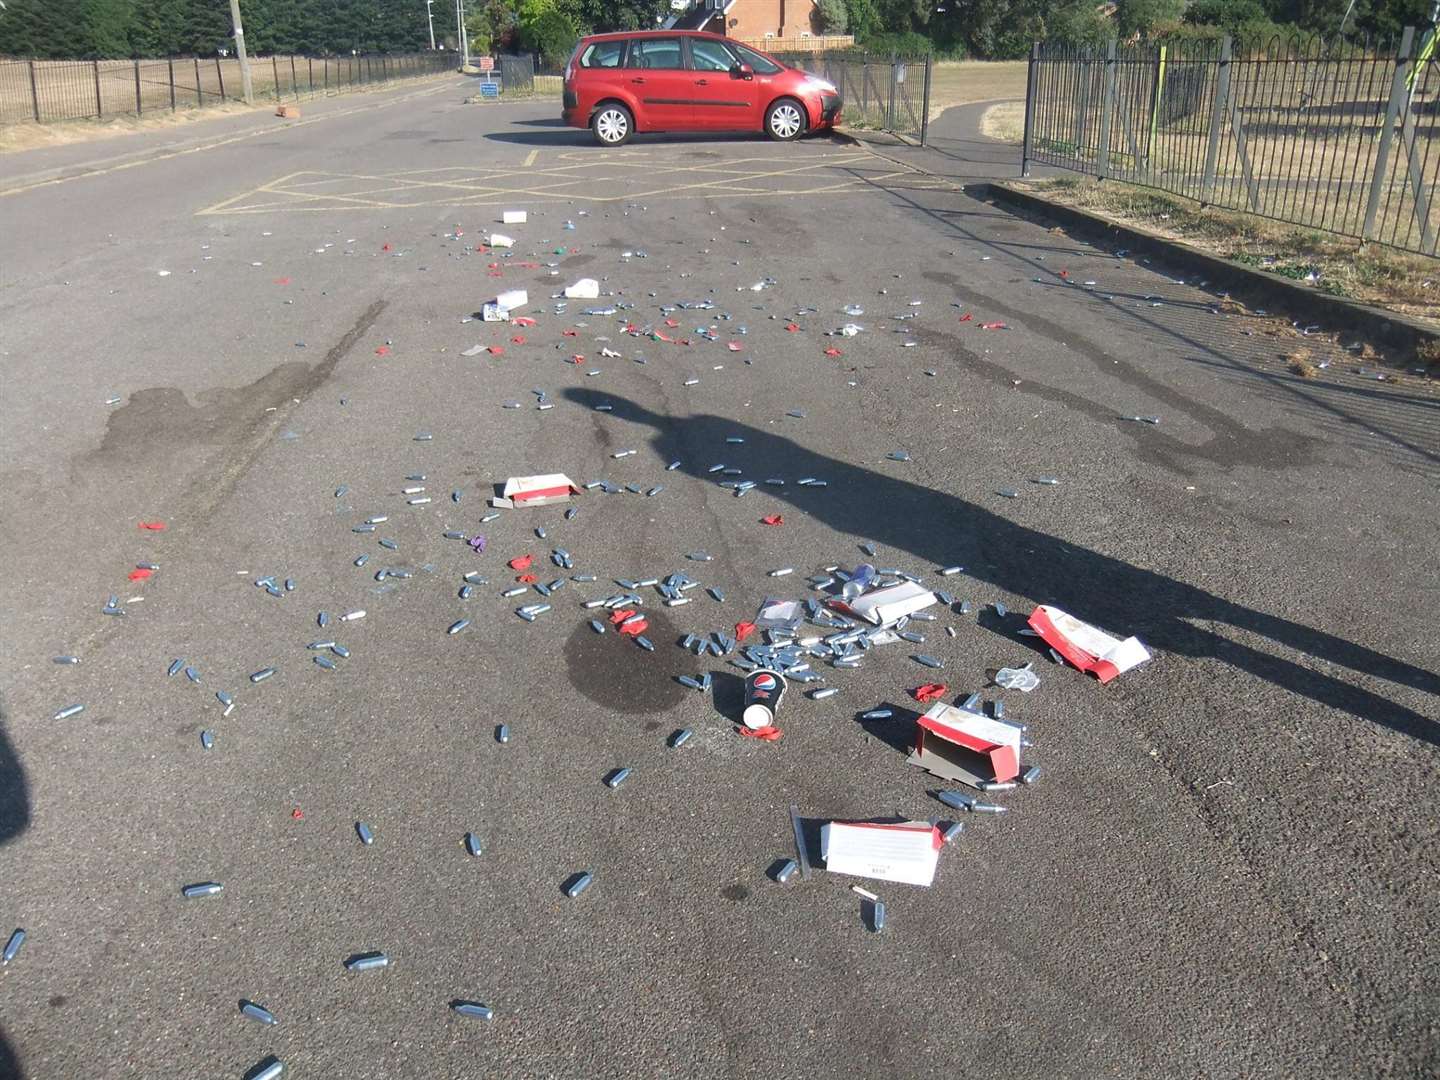 Hundreds of cannisters were found dumped in Larkfield recreation ground's car park (3093883)